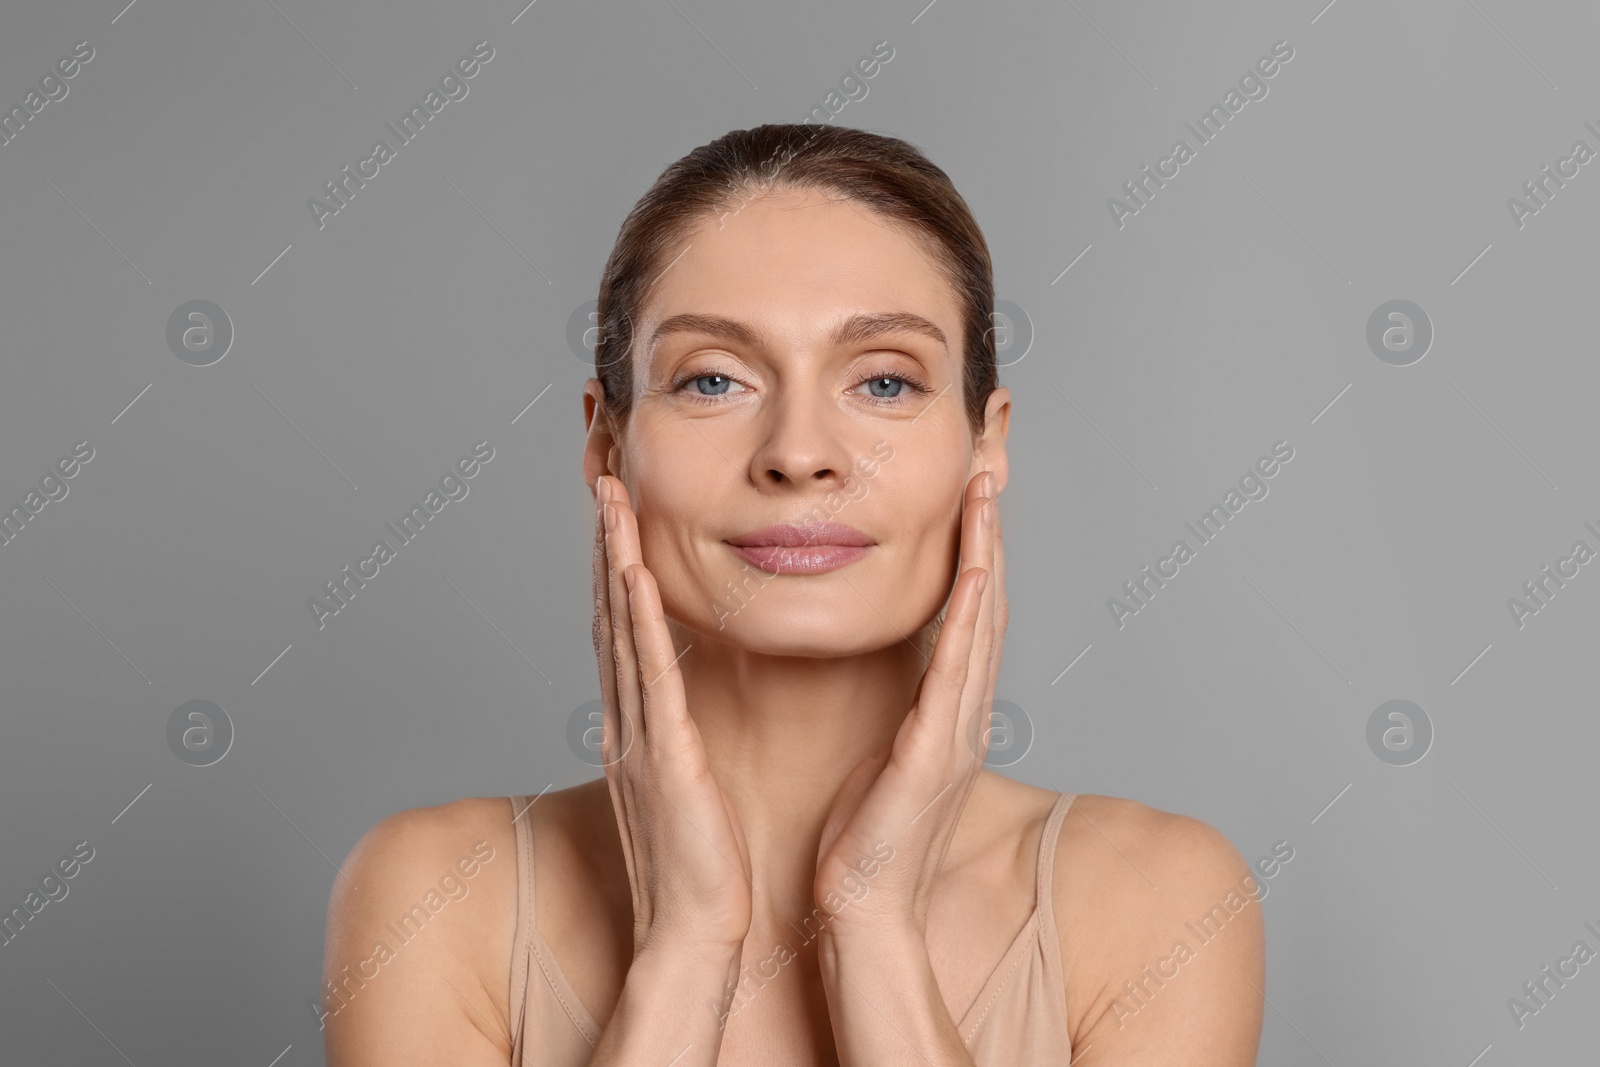 Photo of Woman massaging her face on grey background